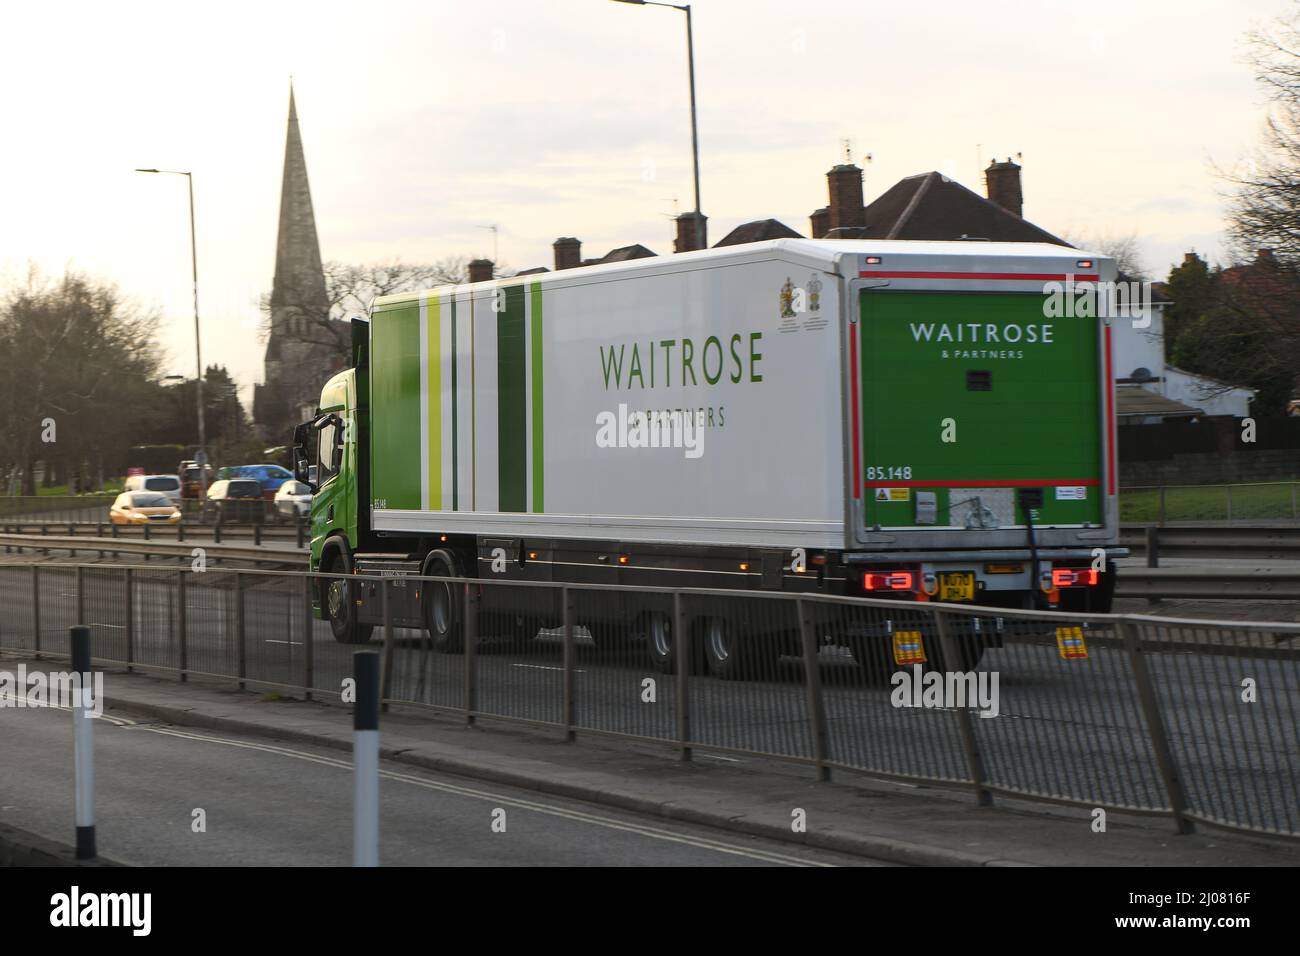 Waitrose articulated lorry driving along the road heading out of Southampton along the A35. Stock Photo